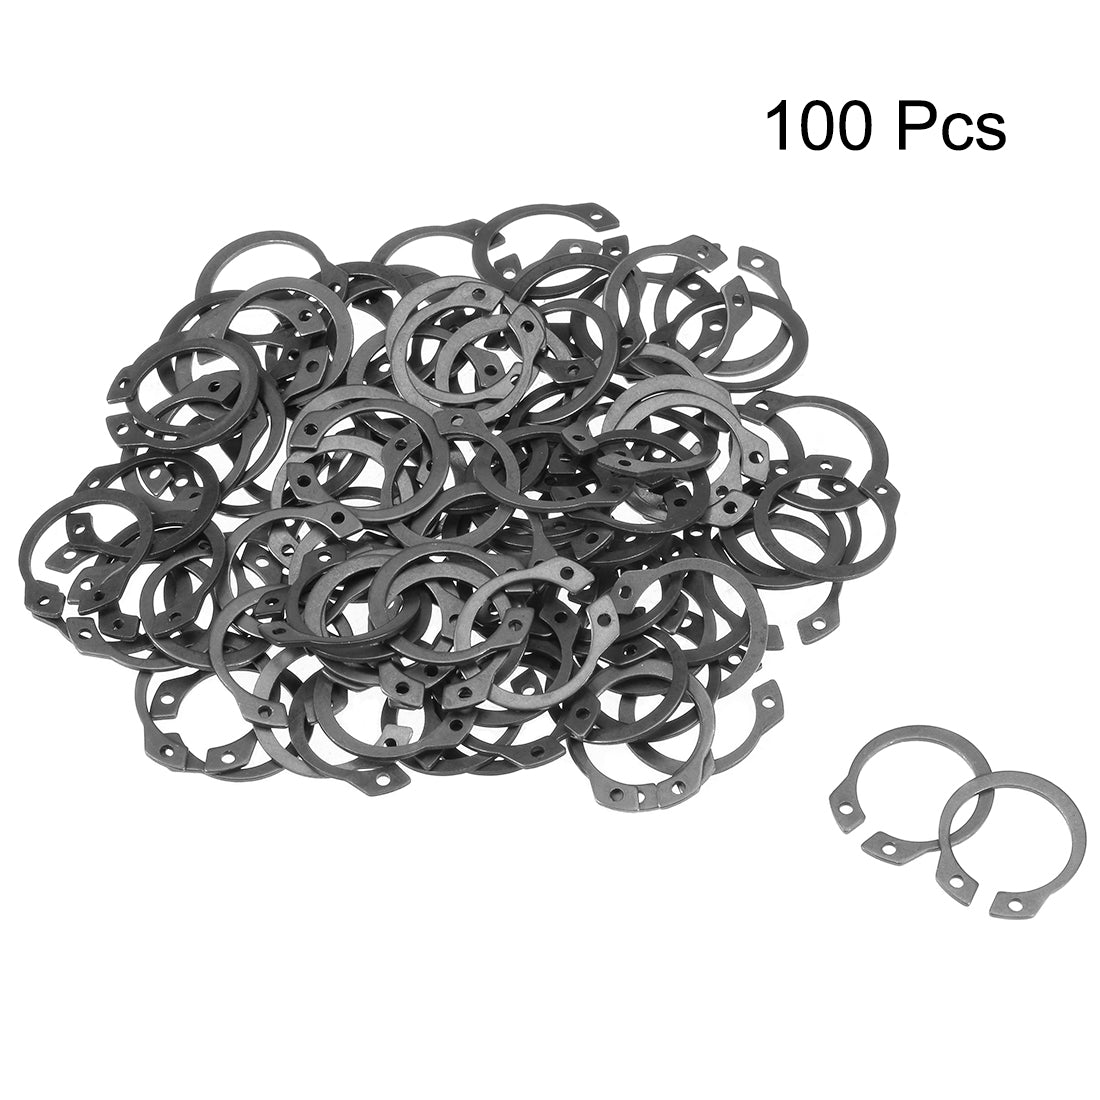 uxcell Uxcell 20mm External Circlips C-Clip Retaining Shaft Snap Rings 65Mn 100pcs